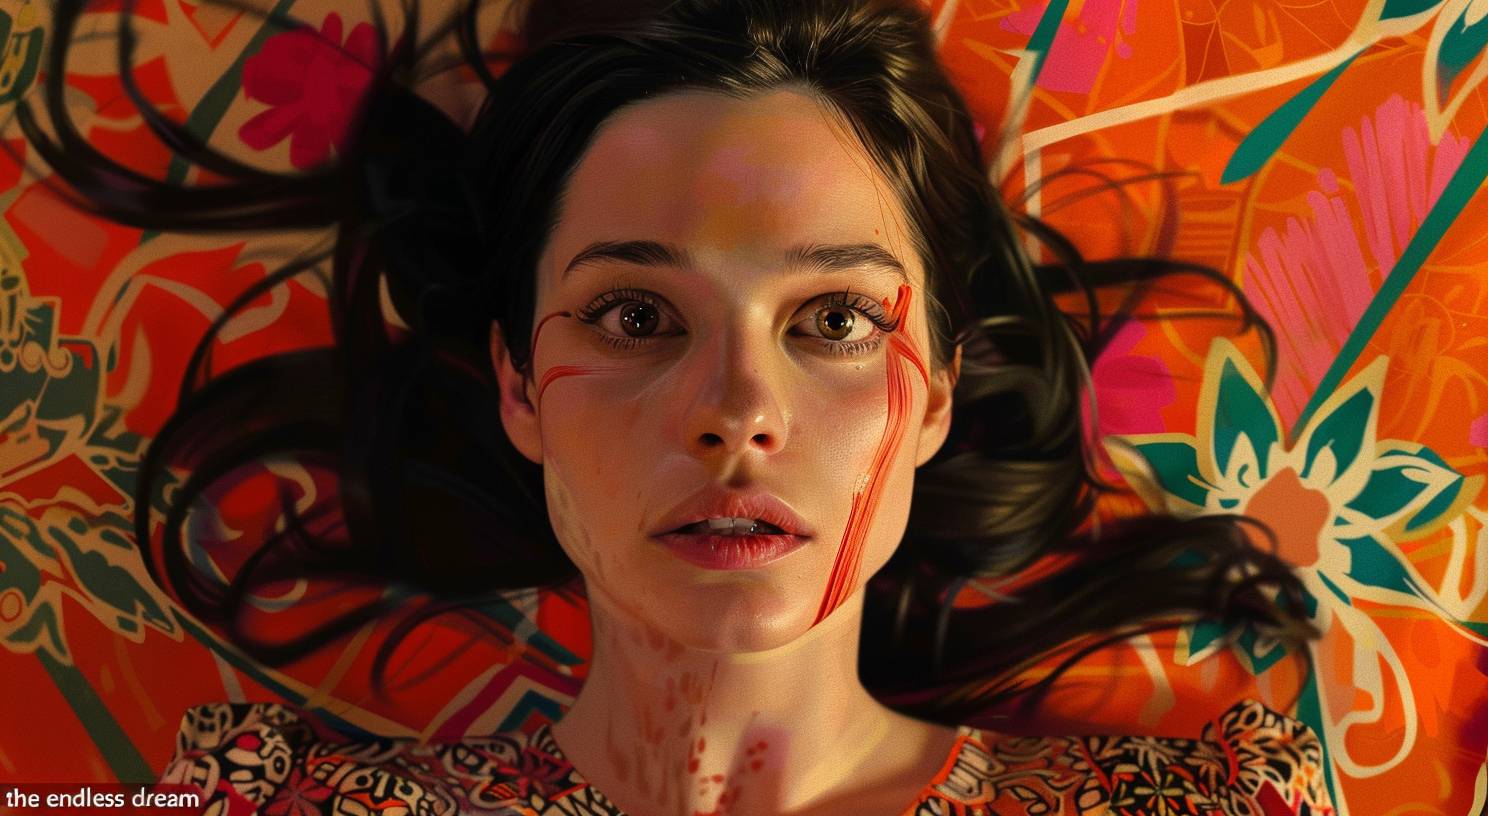 Screengrab from the film 'The Endless Dream' by Paul Verhoeven. A beautiful woman with dark hair and brown eyes laying on an orange patterned background in Greek style art, a red line of paint running down her cheek, painted in vibrant colors, close-up shot, symmetrical composition, surrealism, epic scene, wide angle